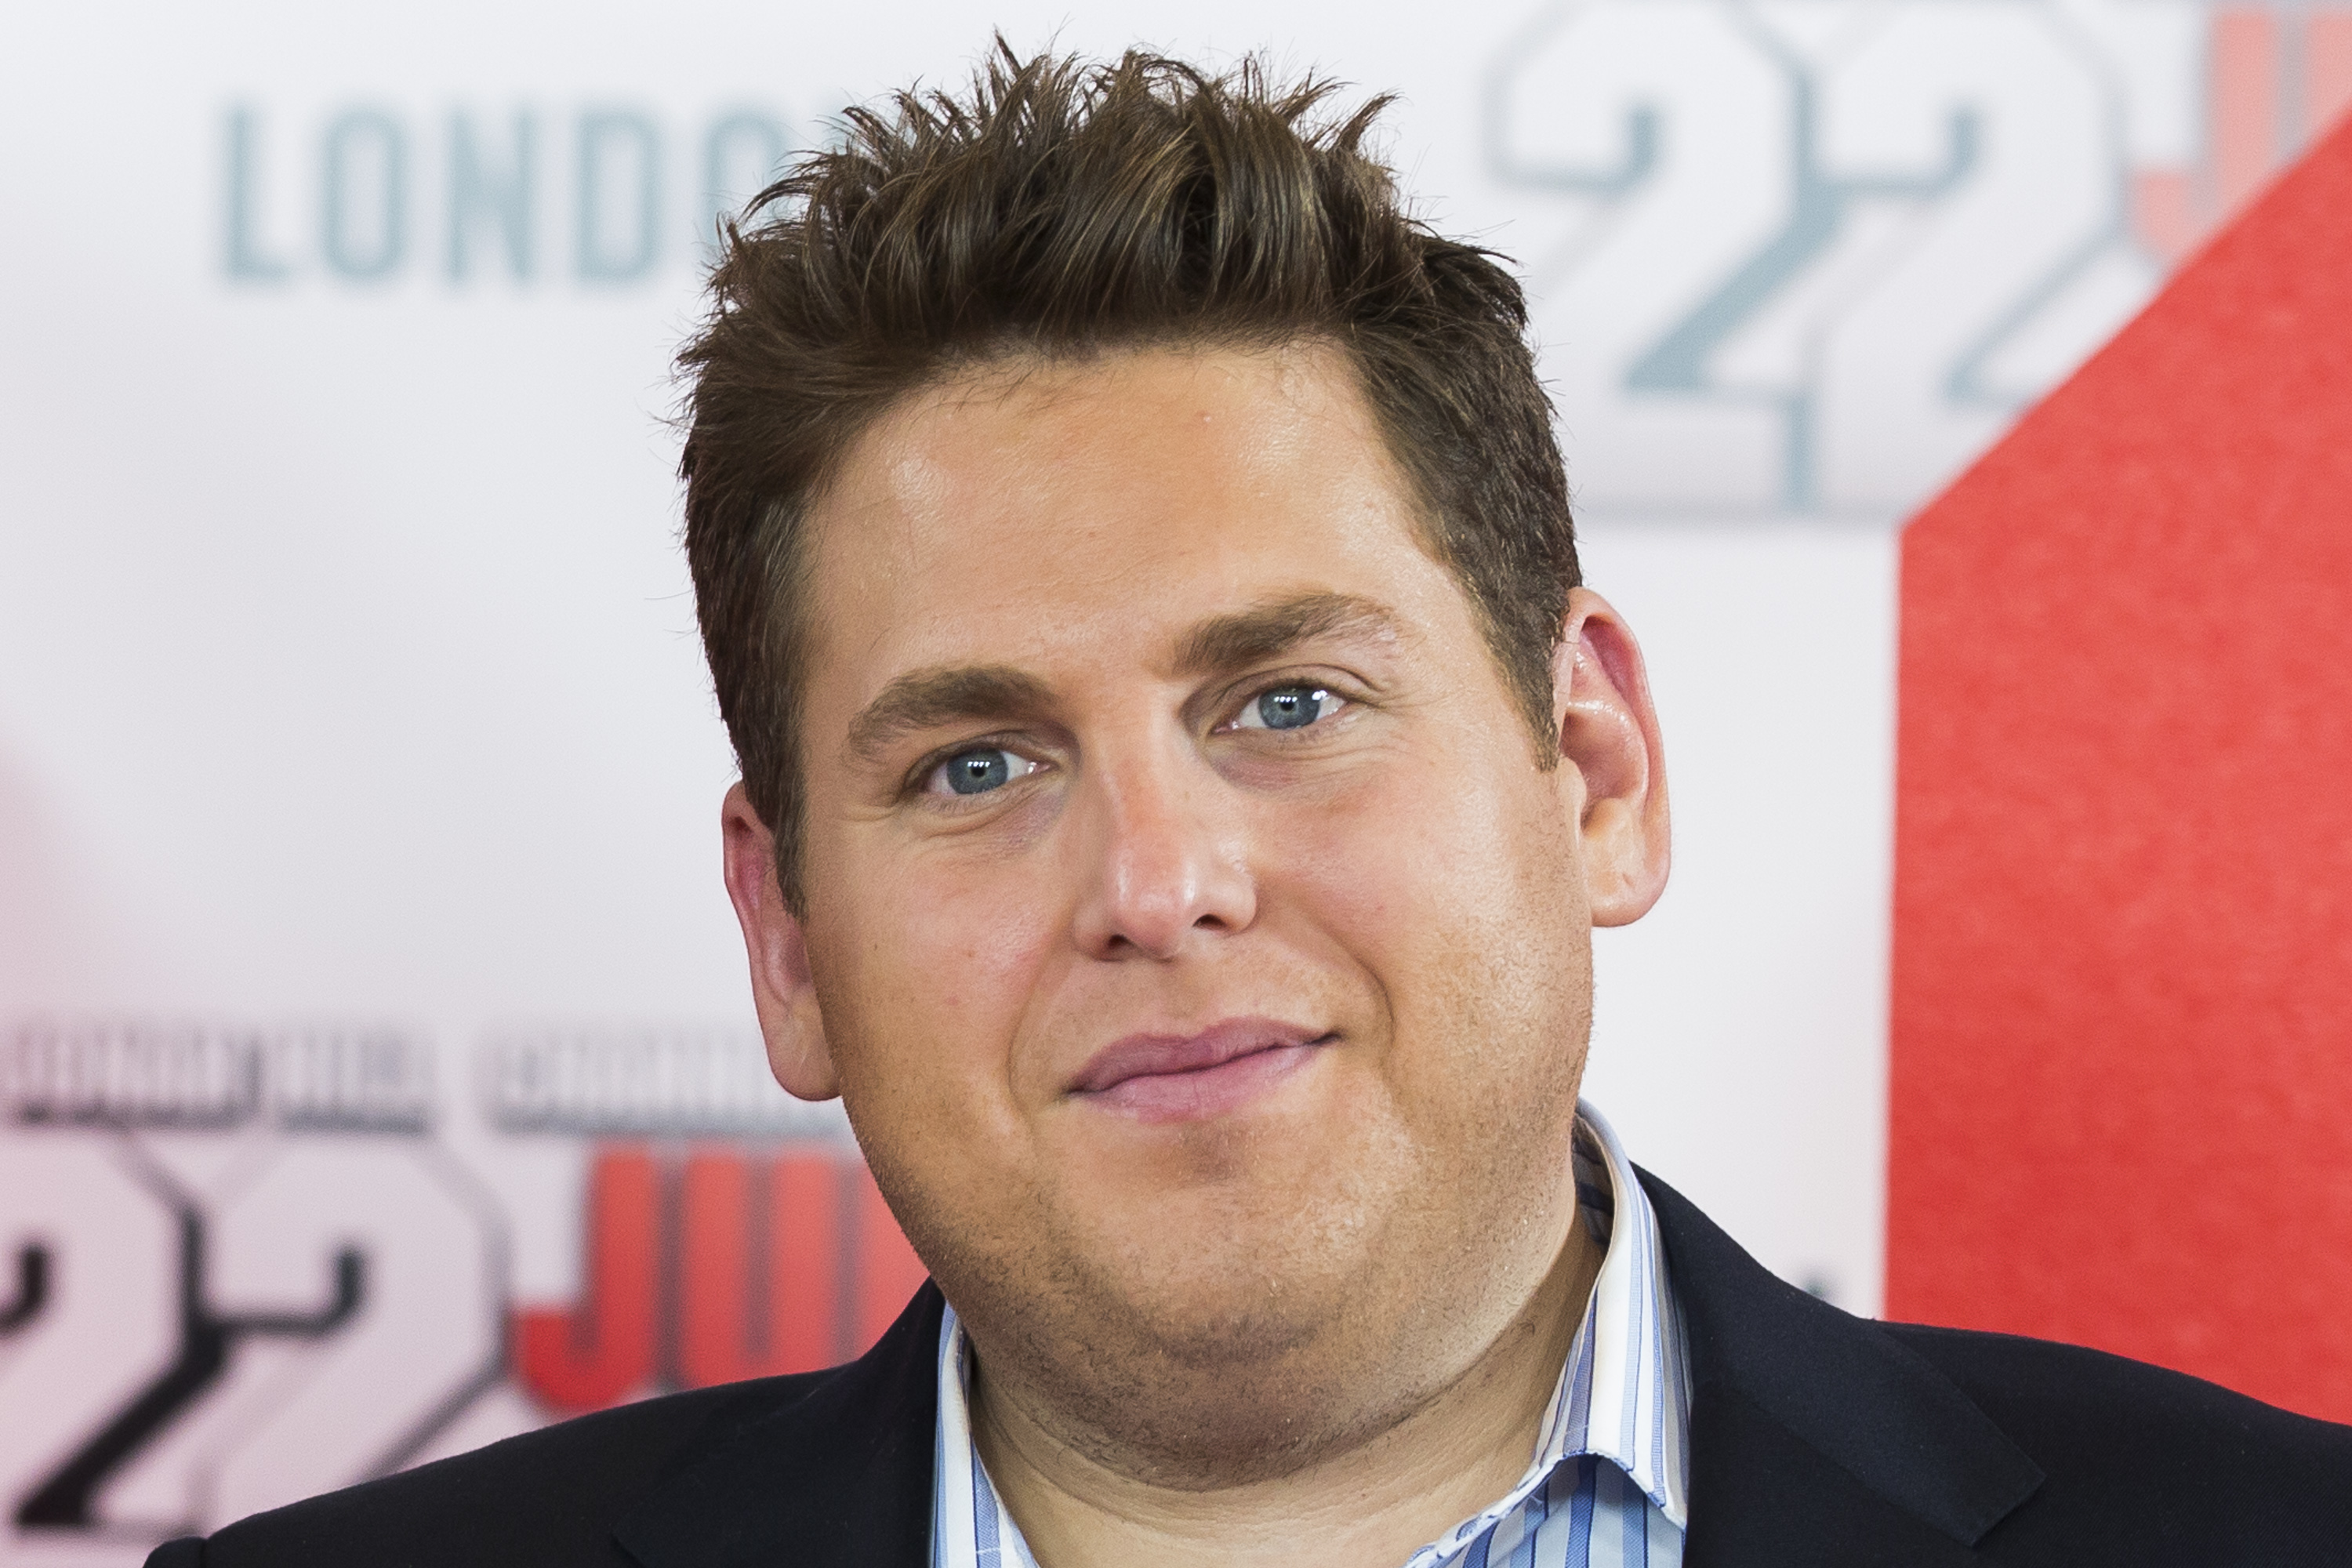 Jonah Hill attends a photocall to promote their new film '22 Jump Street' (Tristan Fewings—Getty Images)